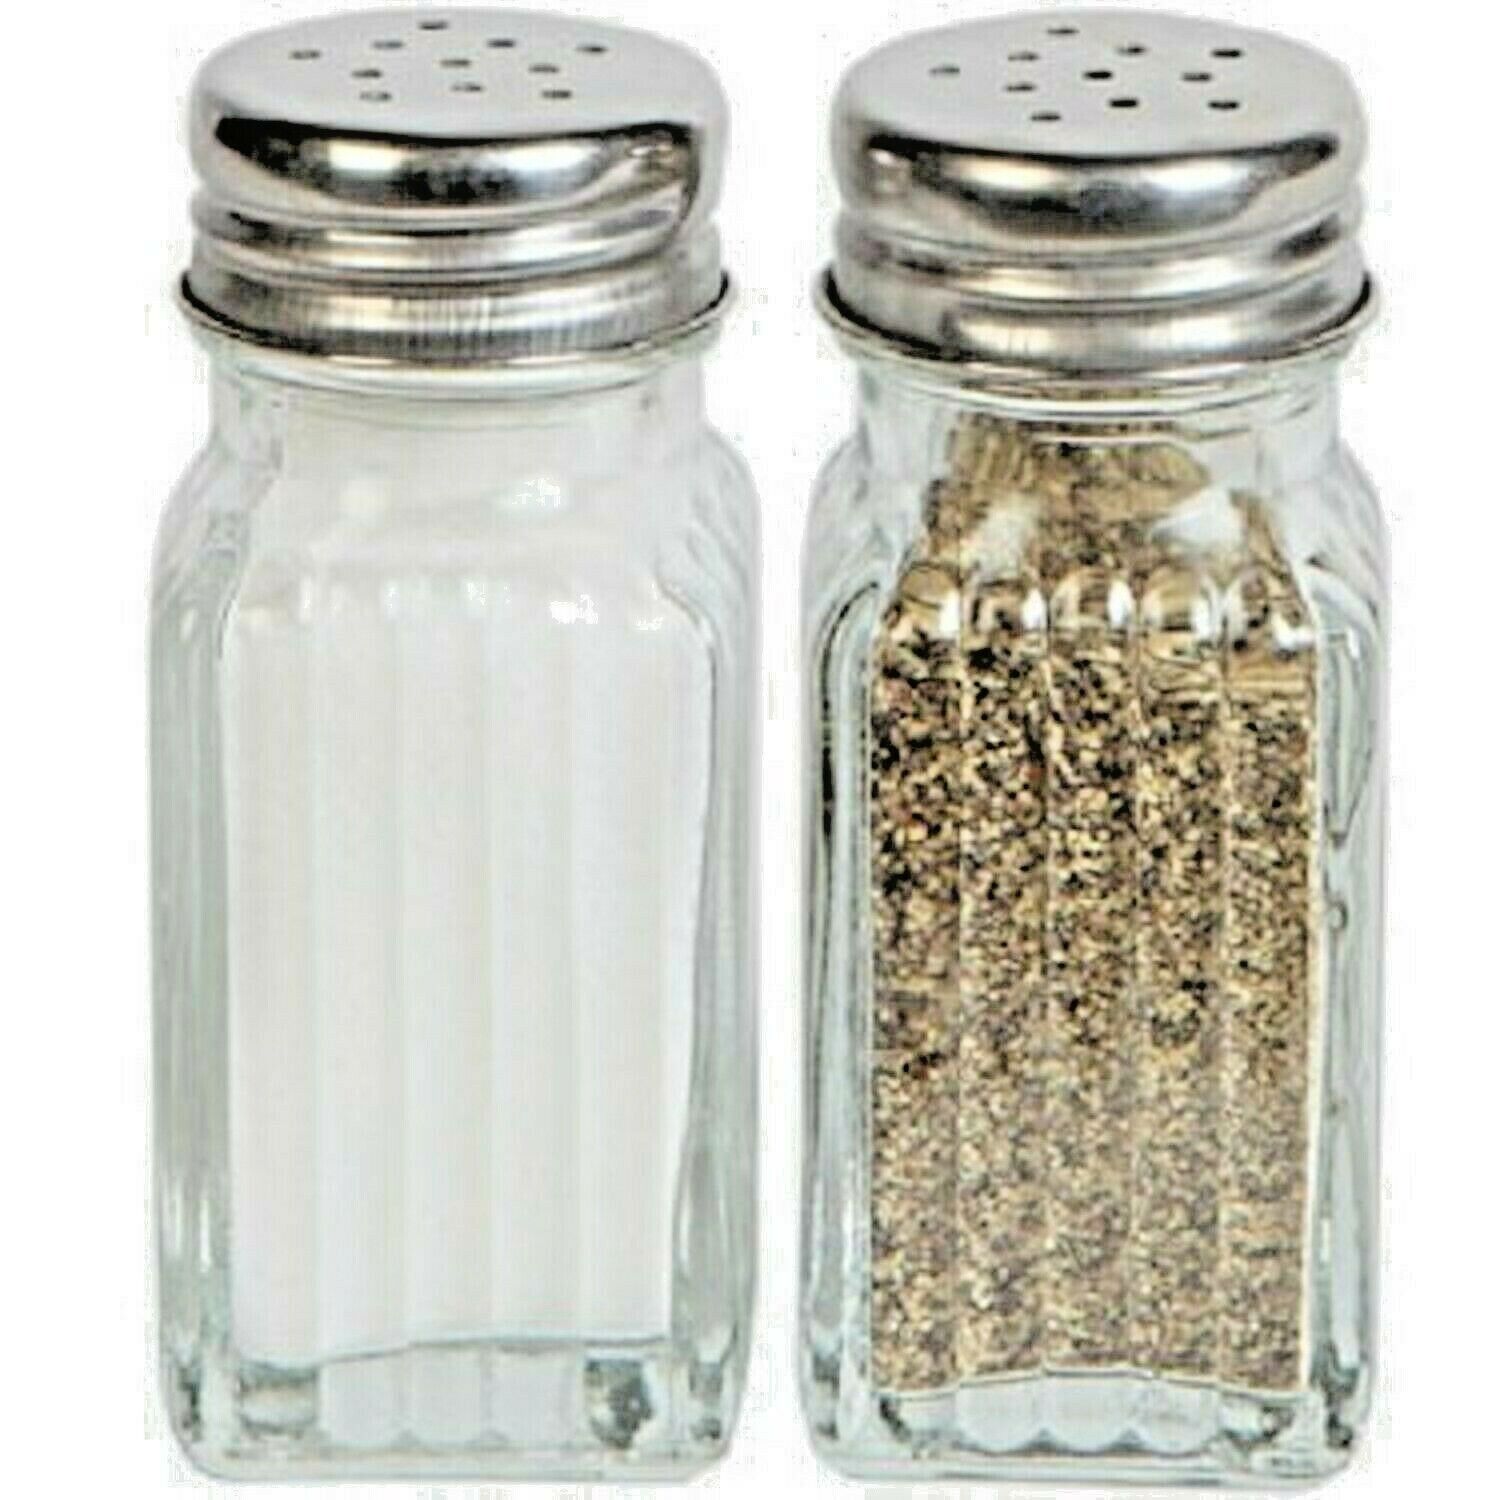 Salt & Pepper Shaker Glass Set by Cooking Concepts - Brand New in Box Retro Look